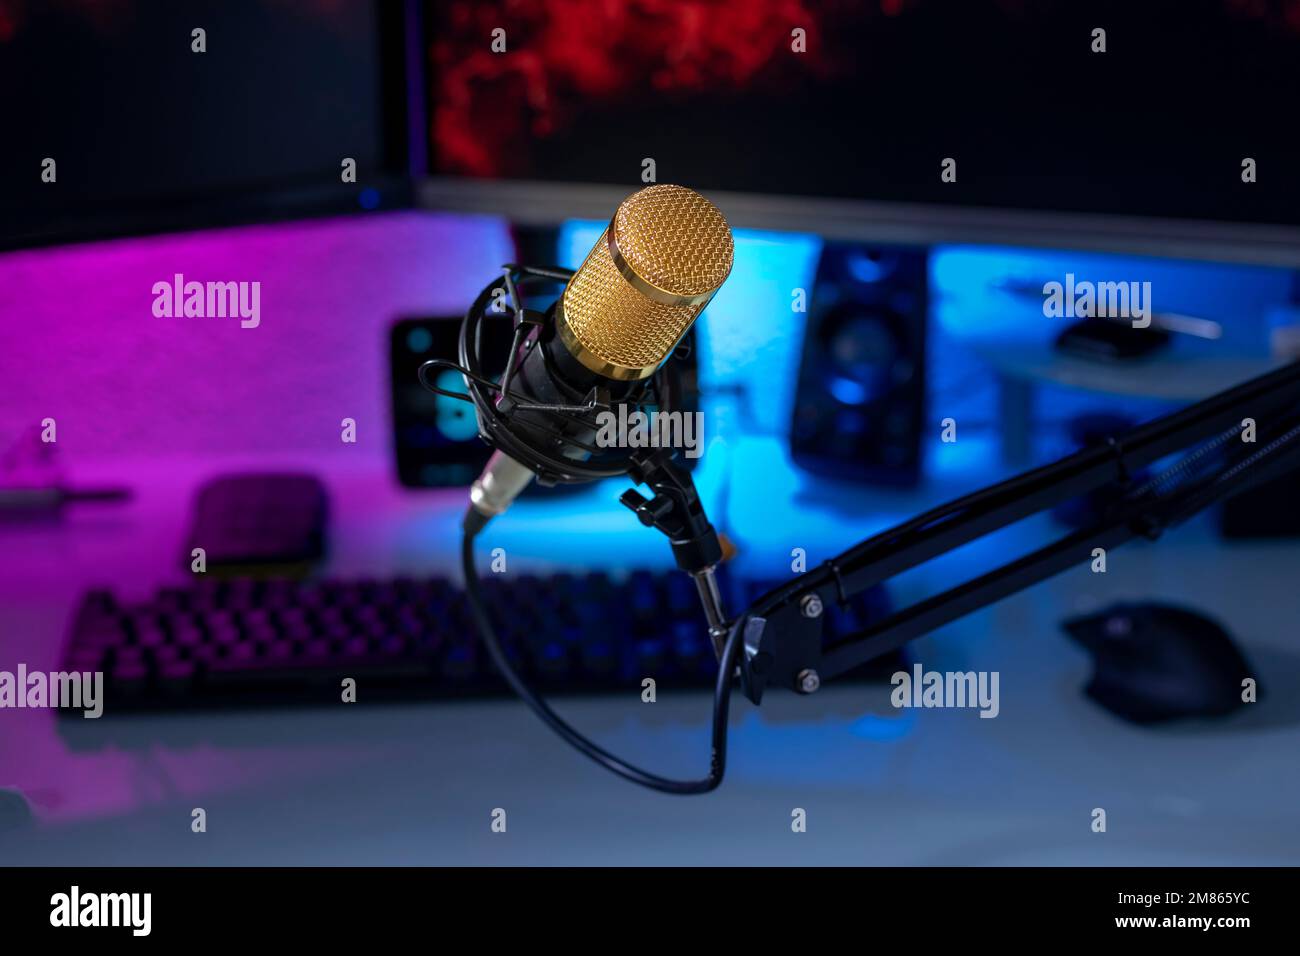 Condenser microphone in gamer setup with monitors, keyboard, mouse and colored lights. Stock Photo